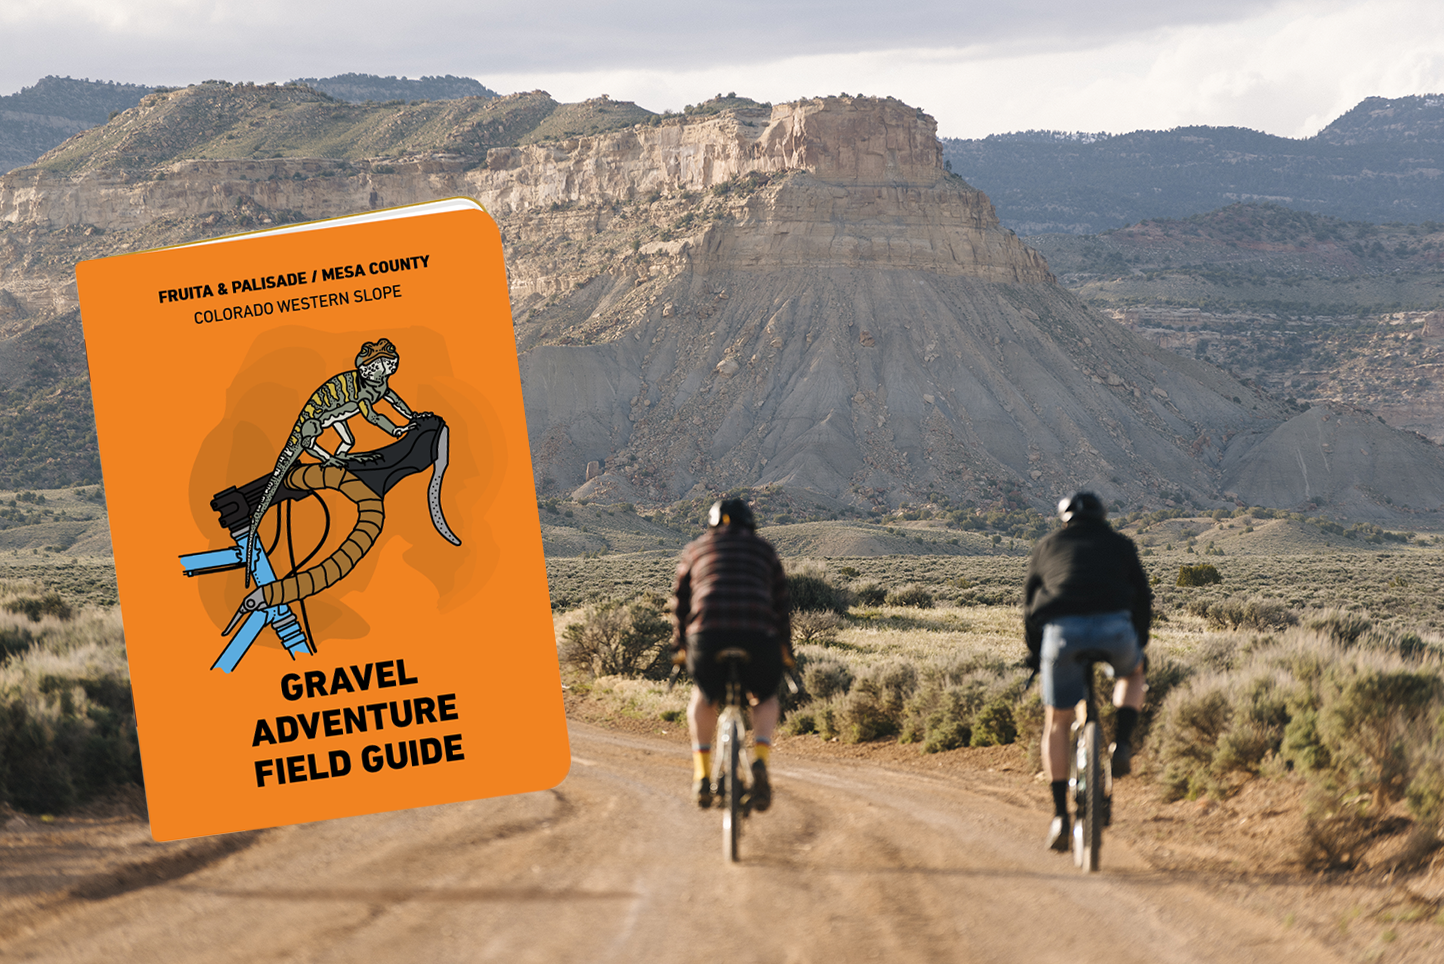 Two bikers riding towards a mountain with a book cover on the left hand side.